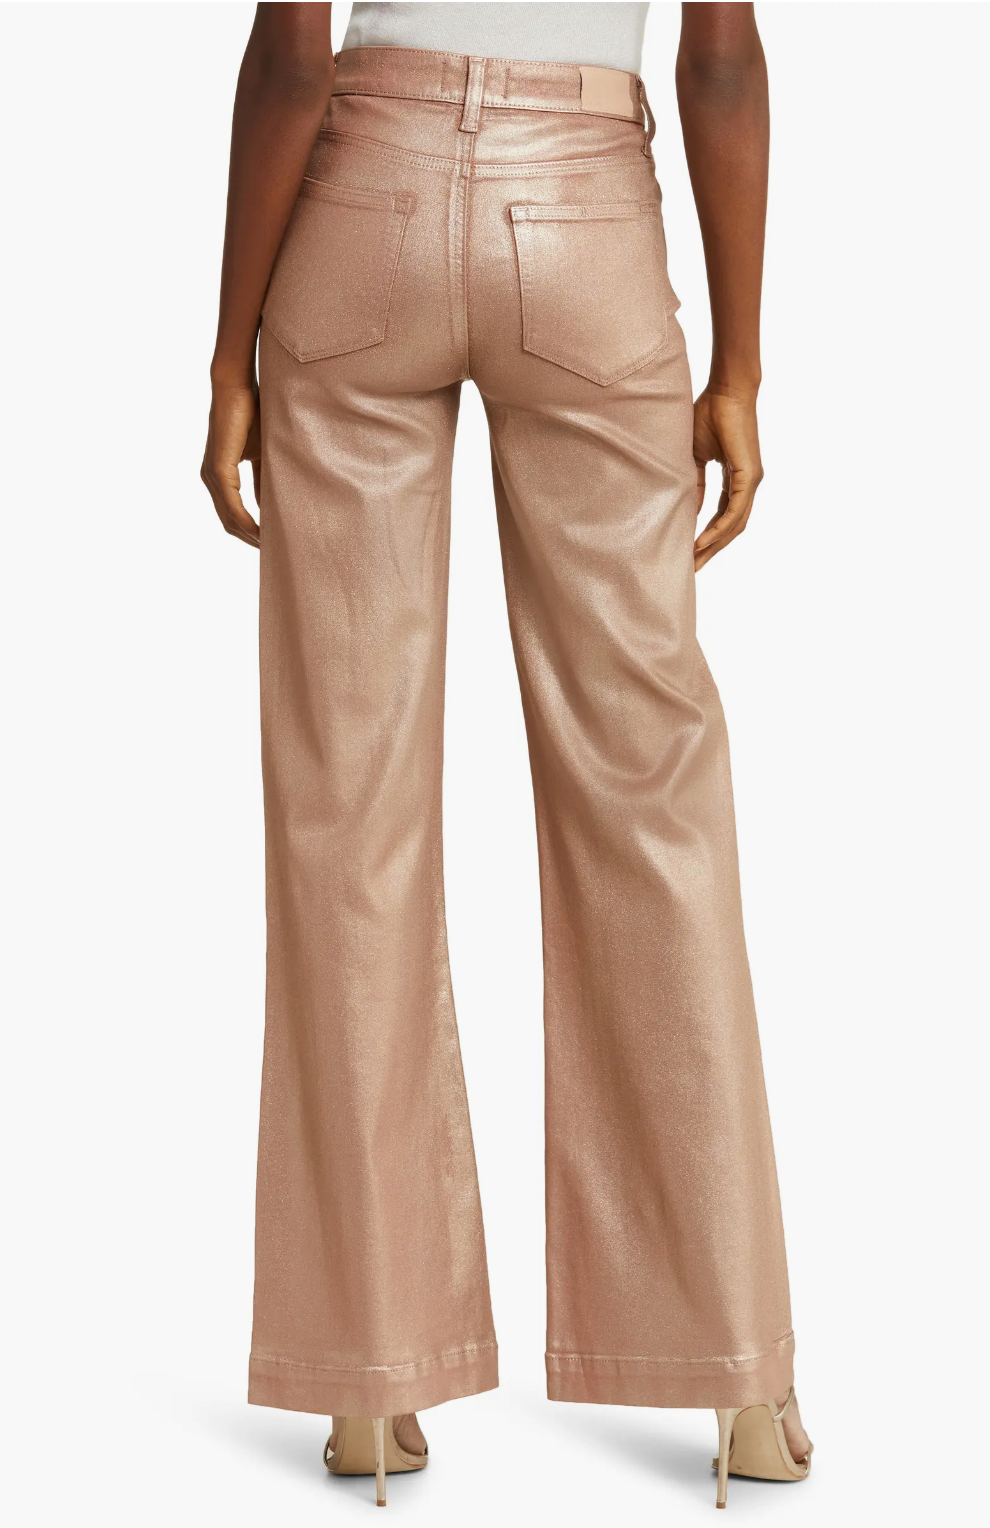 Paige Denim Leenah High Waisted Wide Leg in Pink Champagne Luxe Coating